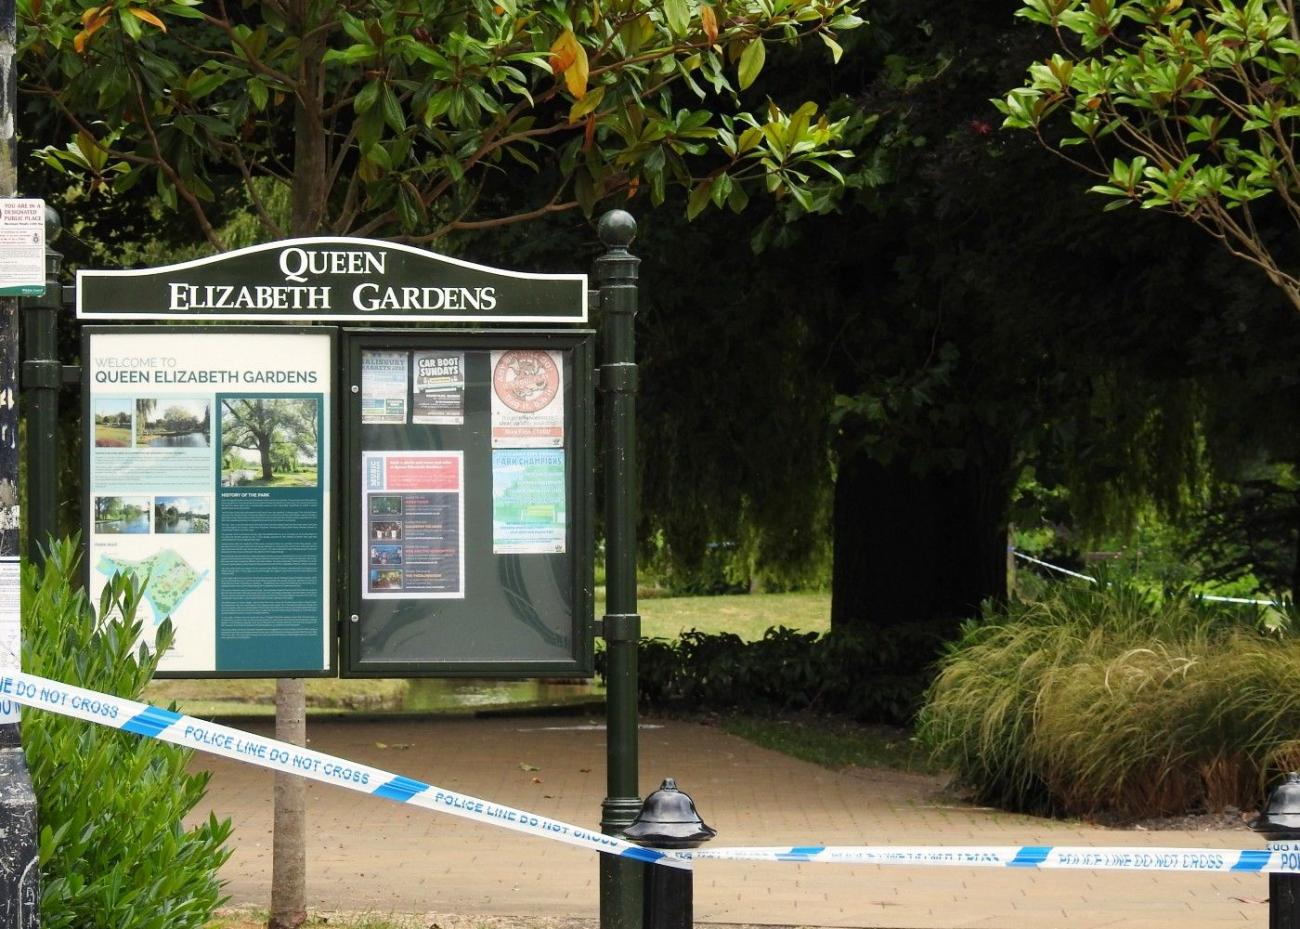 Queen Elizabeth Gardens in Salisbury was closed for almost two months after Charlie Rowley and Dawn Sturgess were found to have been poisoned by Novichok in Amesbury. Picture: Amani A/Shutterstock